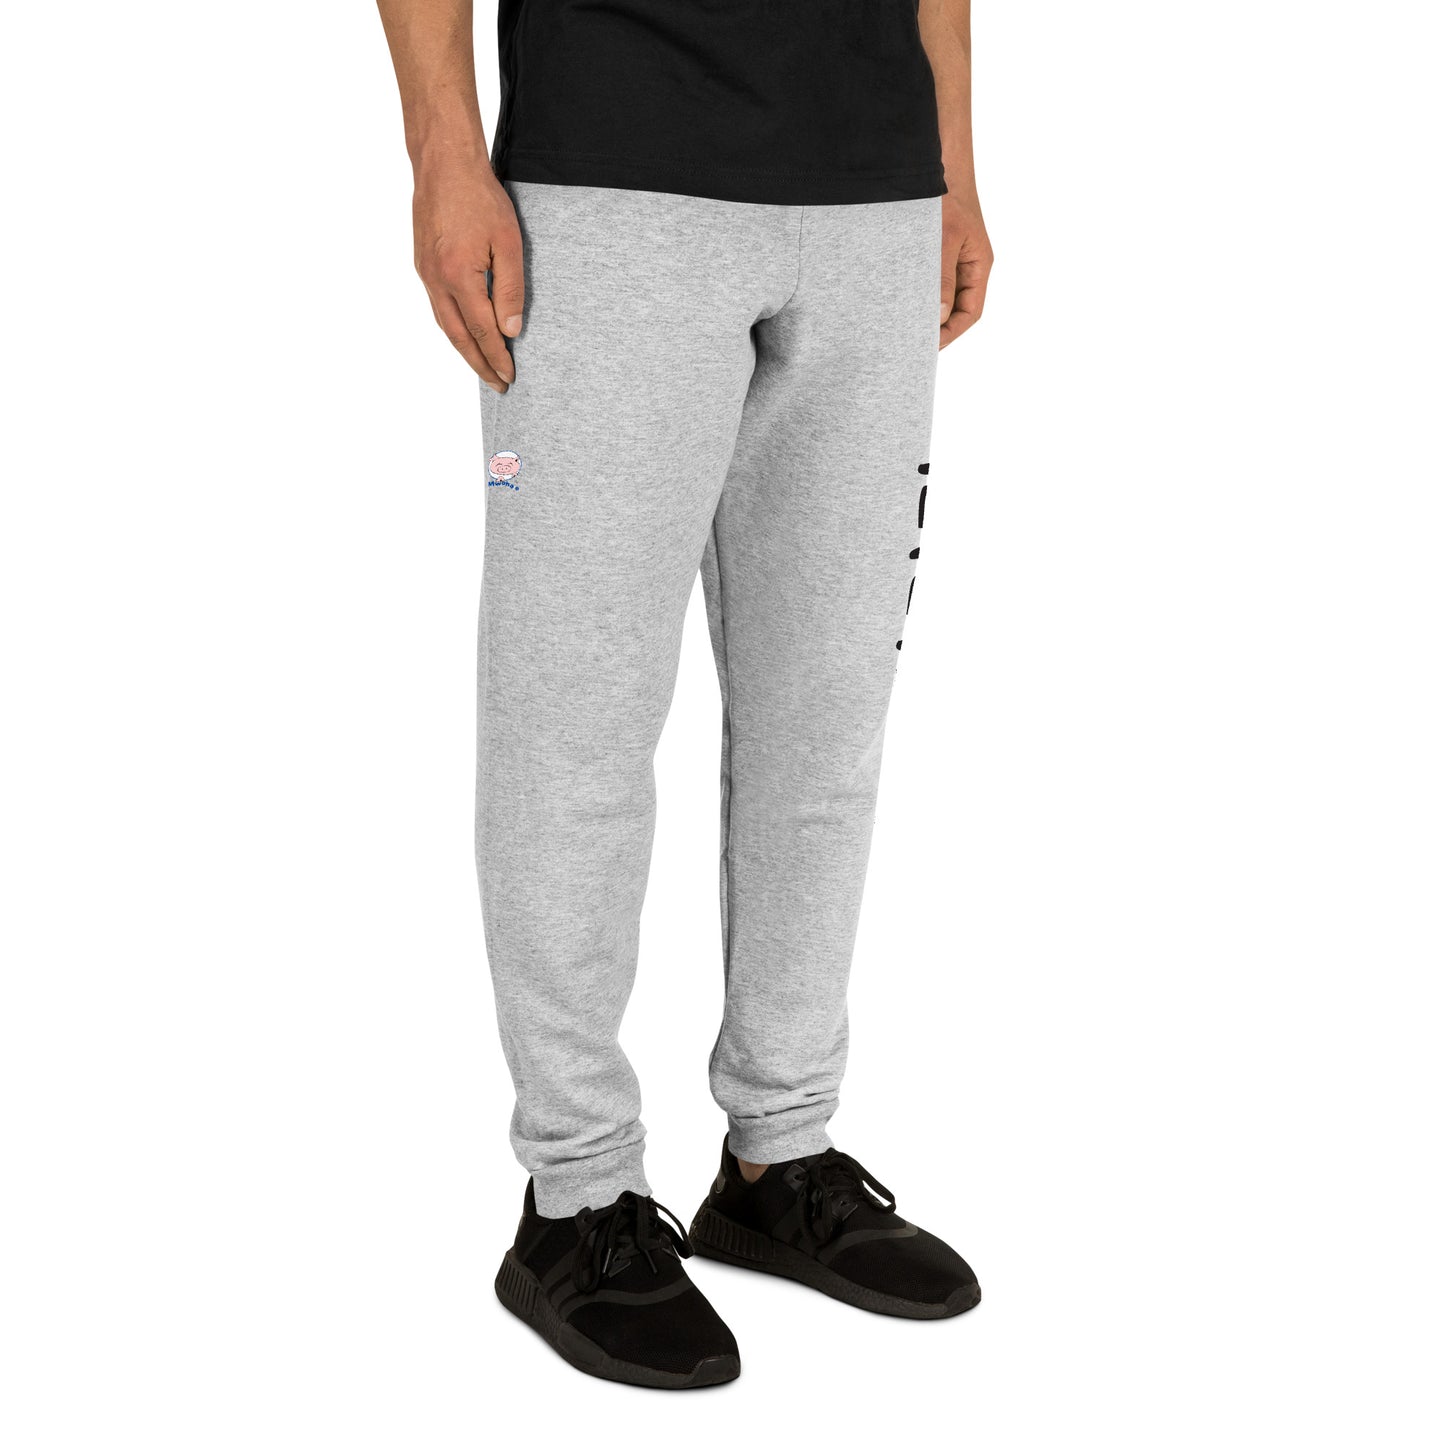 Grey heather pair of joggers with small Mwohae logo on the right leg and the text 'Don't worry' in both English and Hangul on the left leg